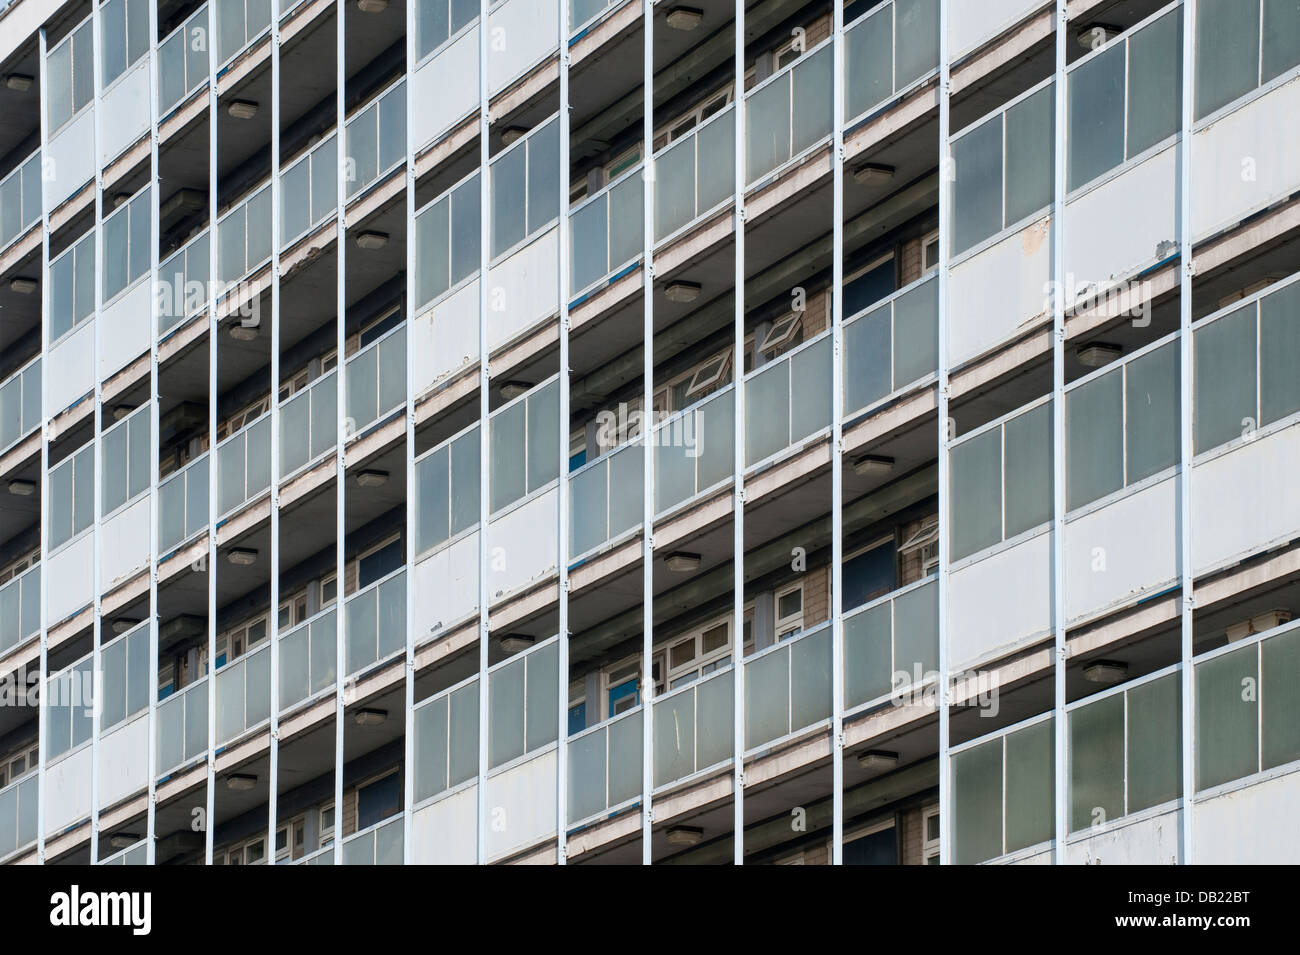 An abstract view of a block of flats in the Brunswick area of Manchester. Stock Photo